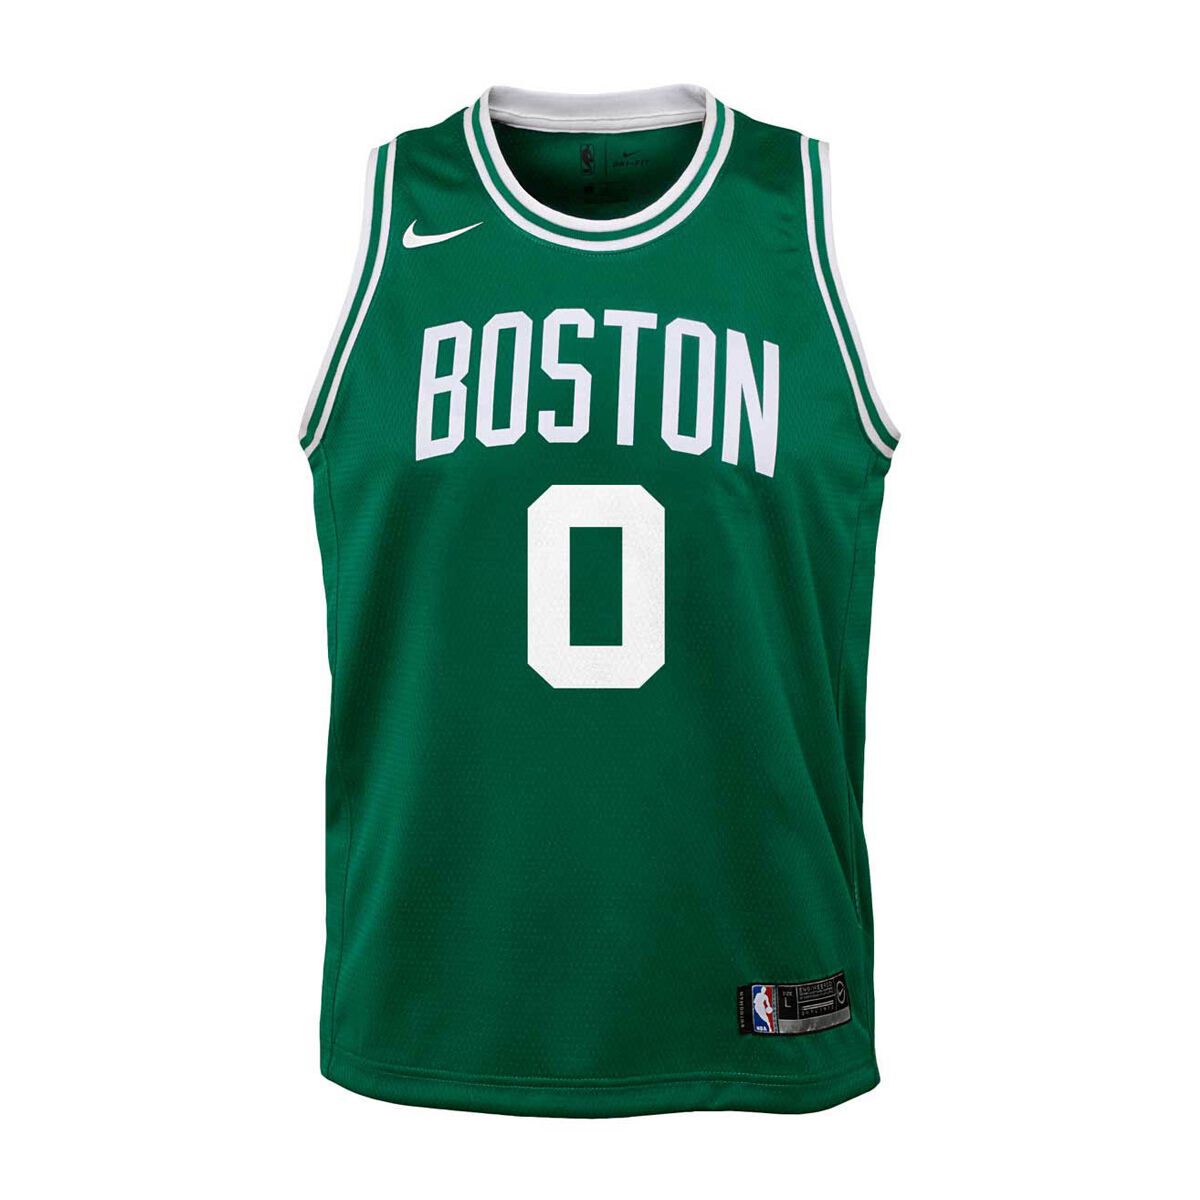 2020-21 Nike NBA Earned Edition jerseys now available in Australia